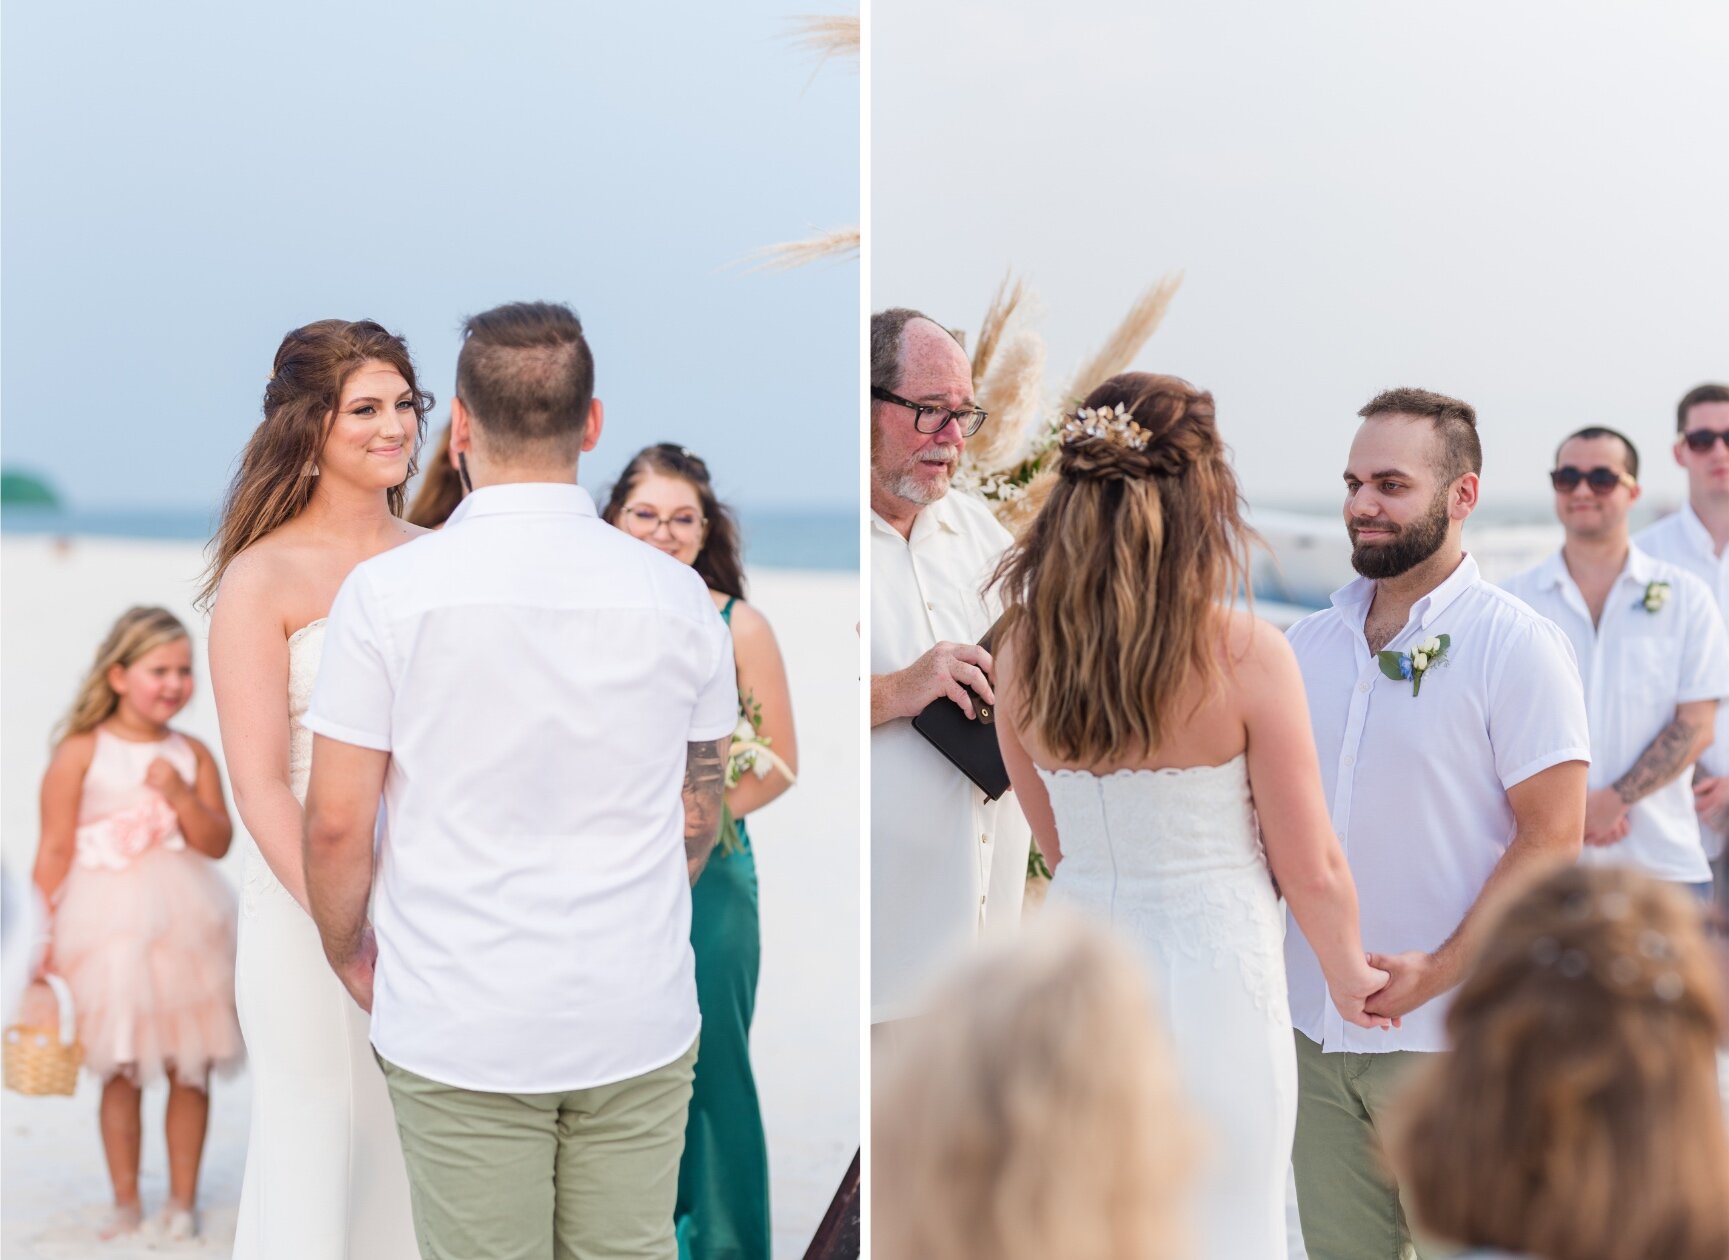 July Orange Beach Wedding Ceremony Photographed by Kristen Marcus Photography